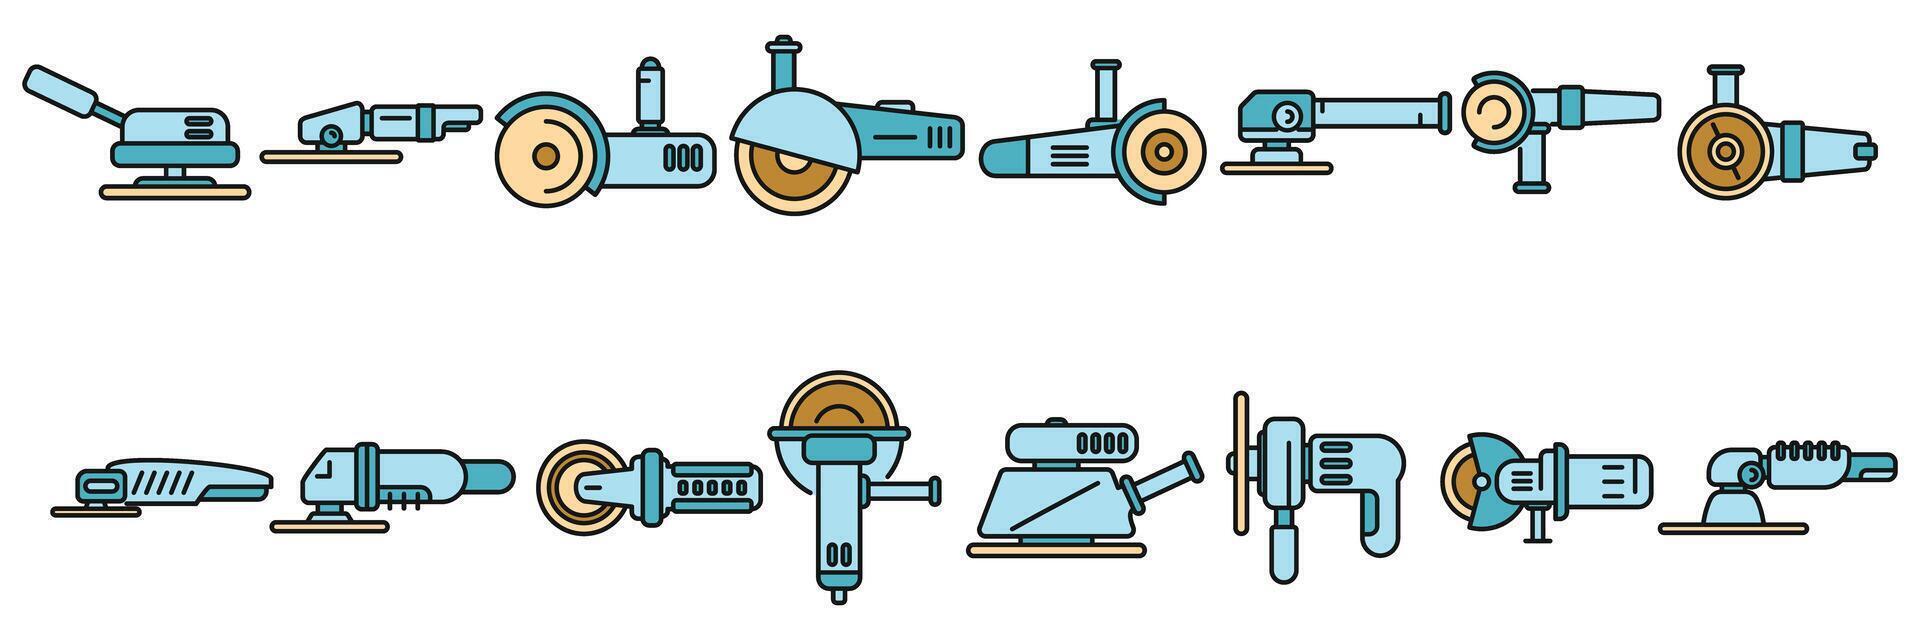 Grinding machine icons set vector color